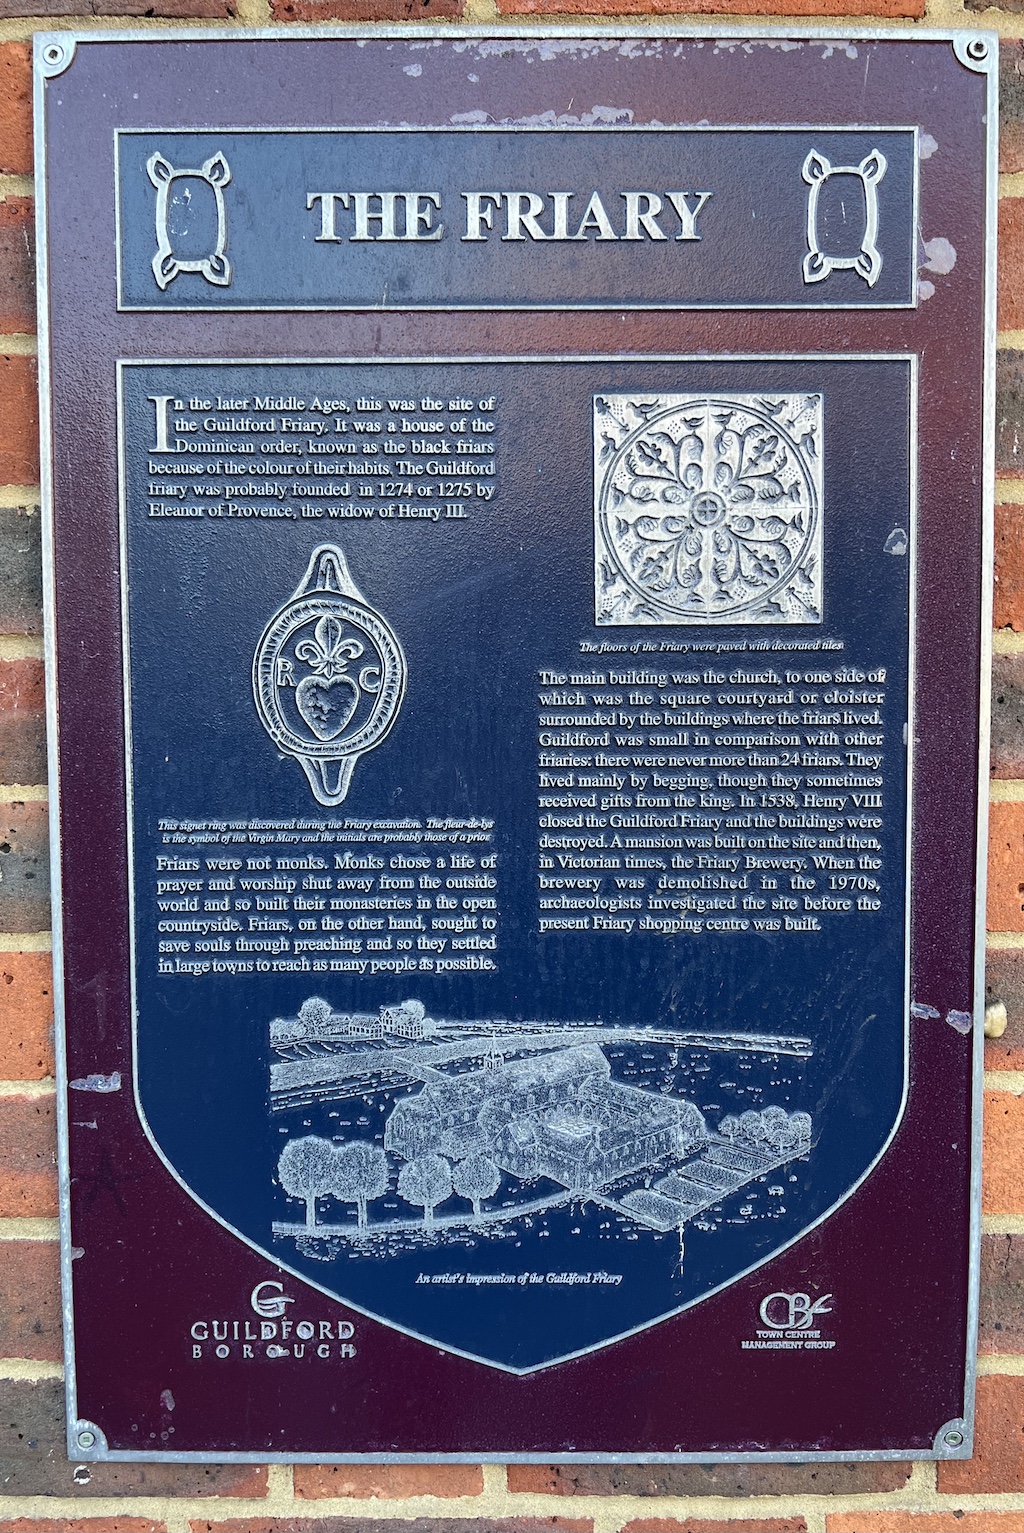 Blue plaque in Guildford for The Friary